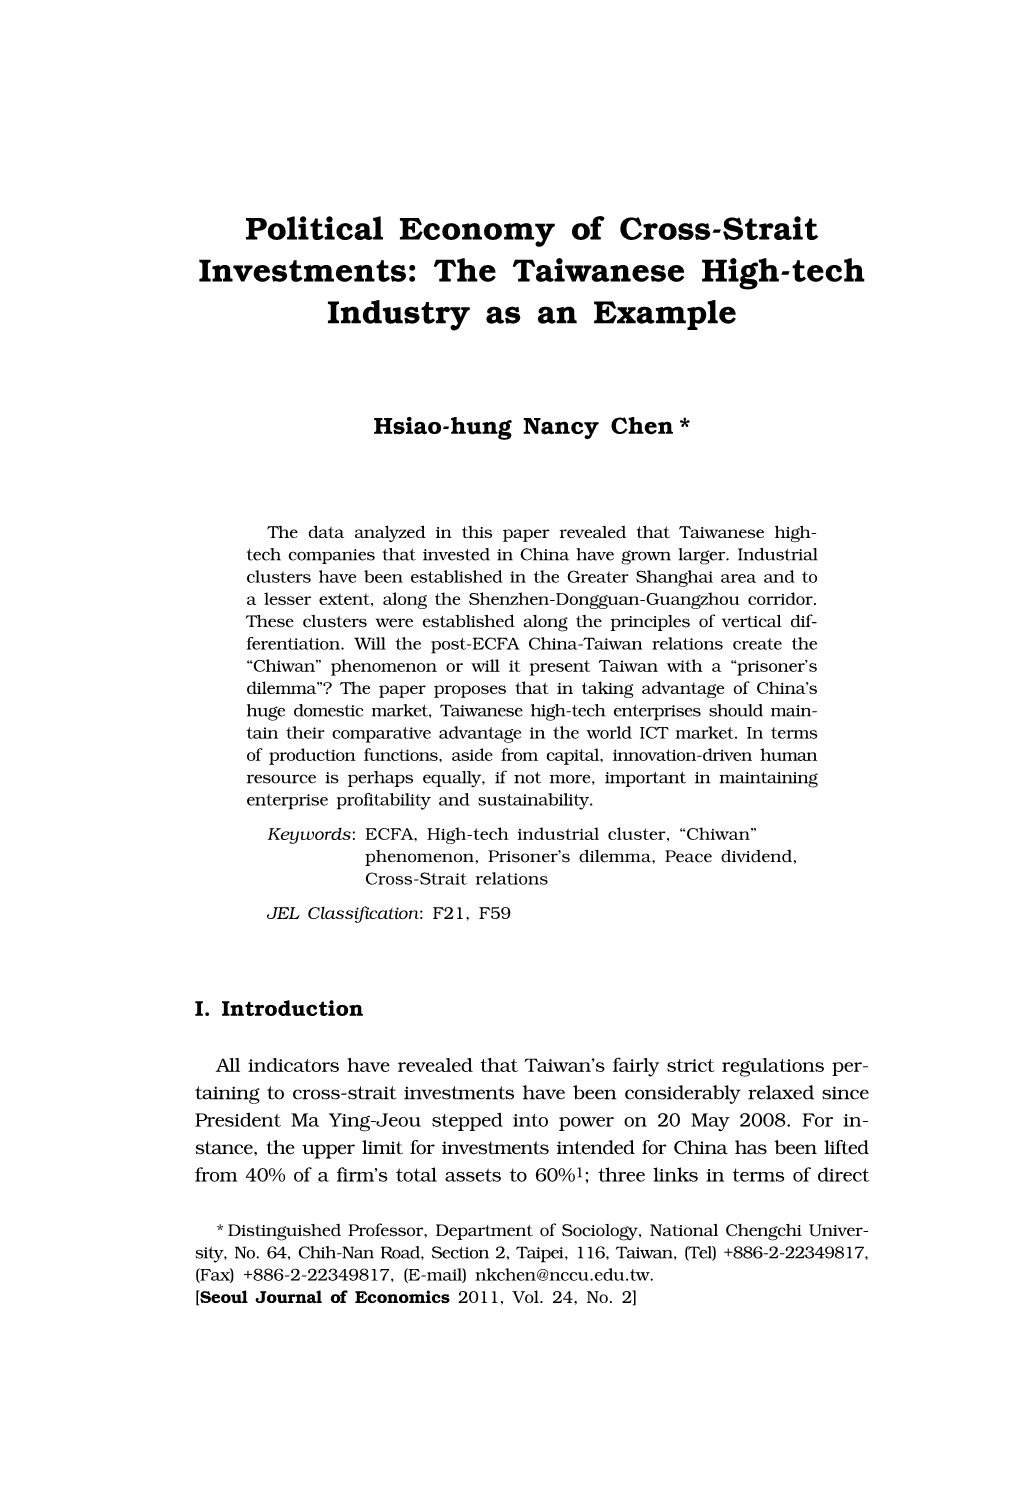 Political Economy of Cross-Strait Investments: the Taiwanese High-Tech Industry As an Example 1